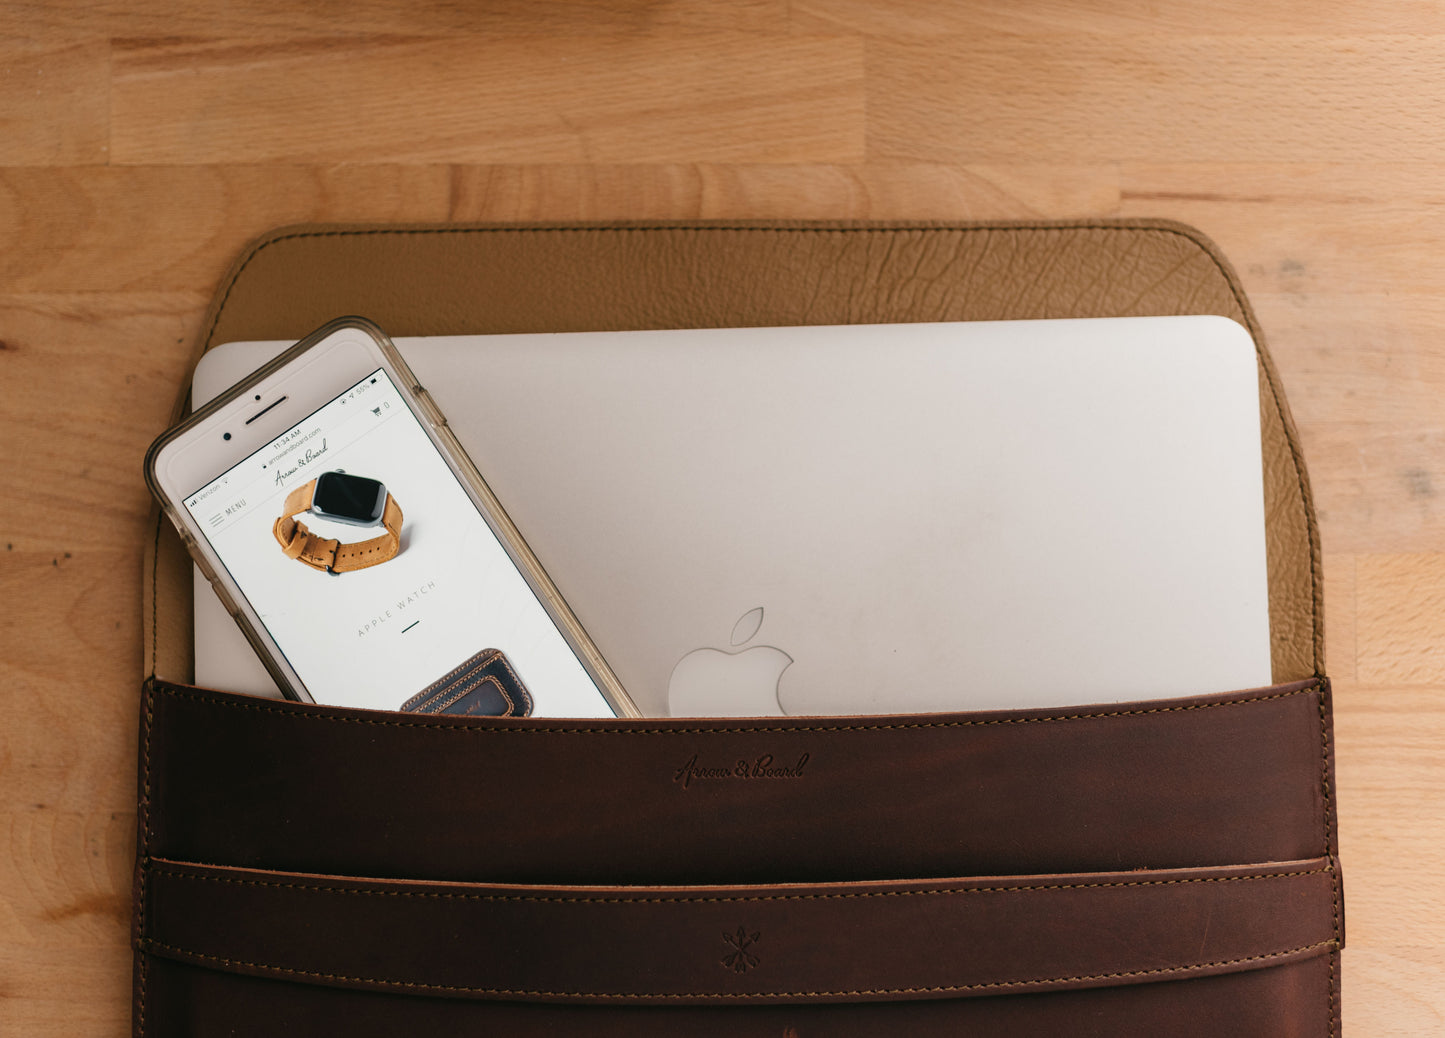 Load image into Gallery viewer, Leather MacBook Envelope Case - Chestnut
